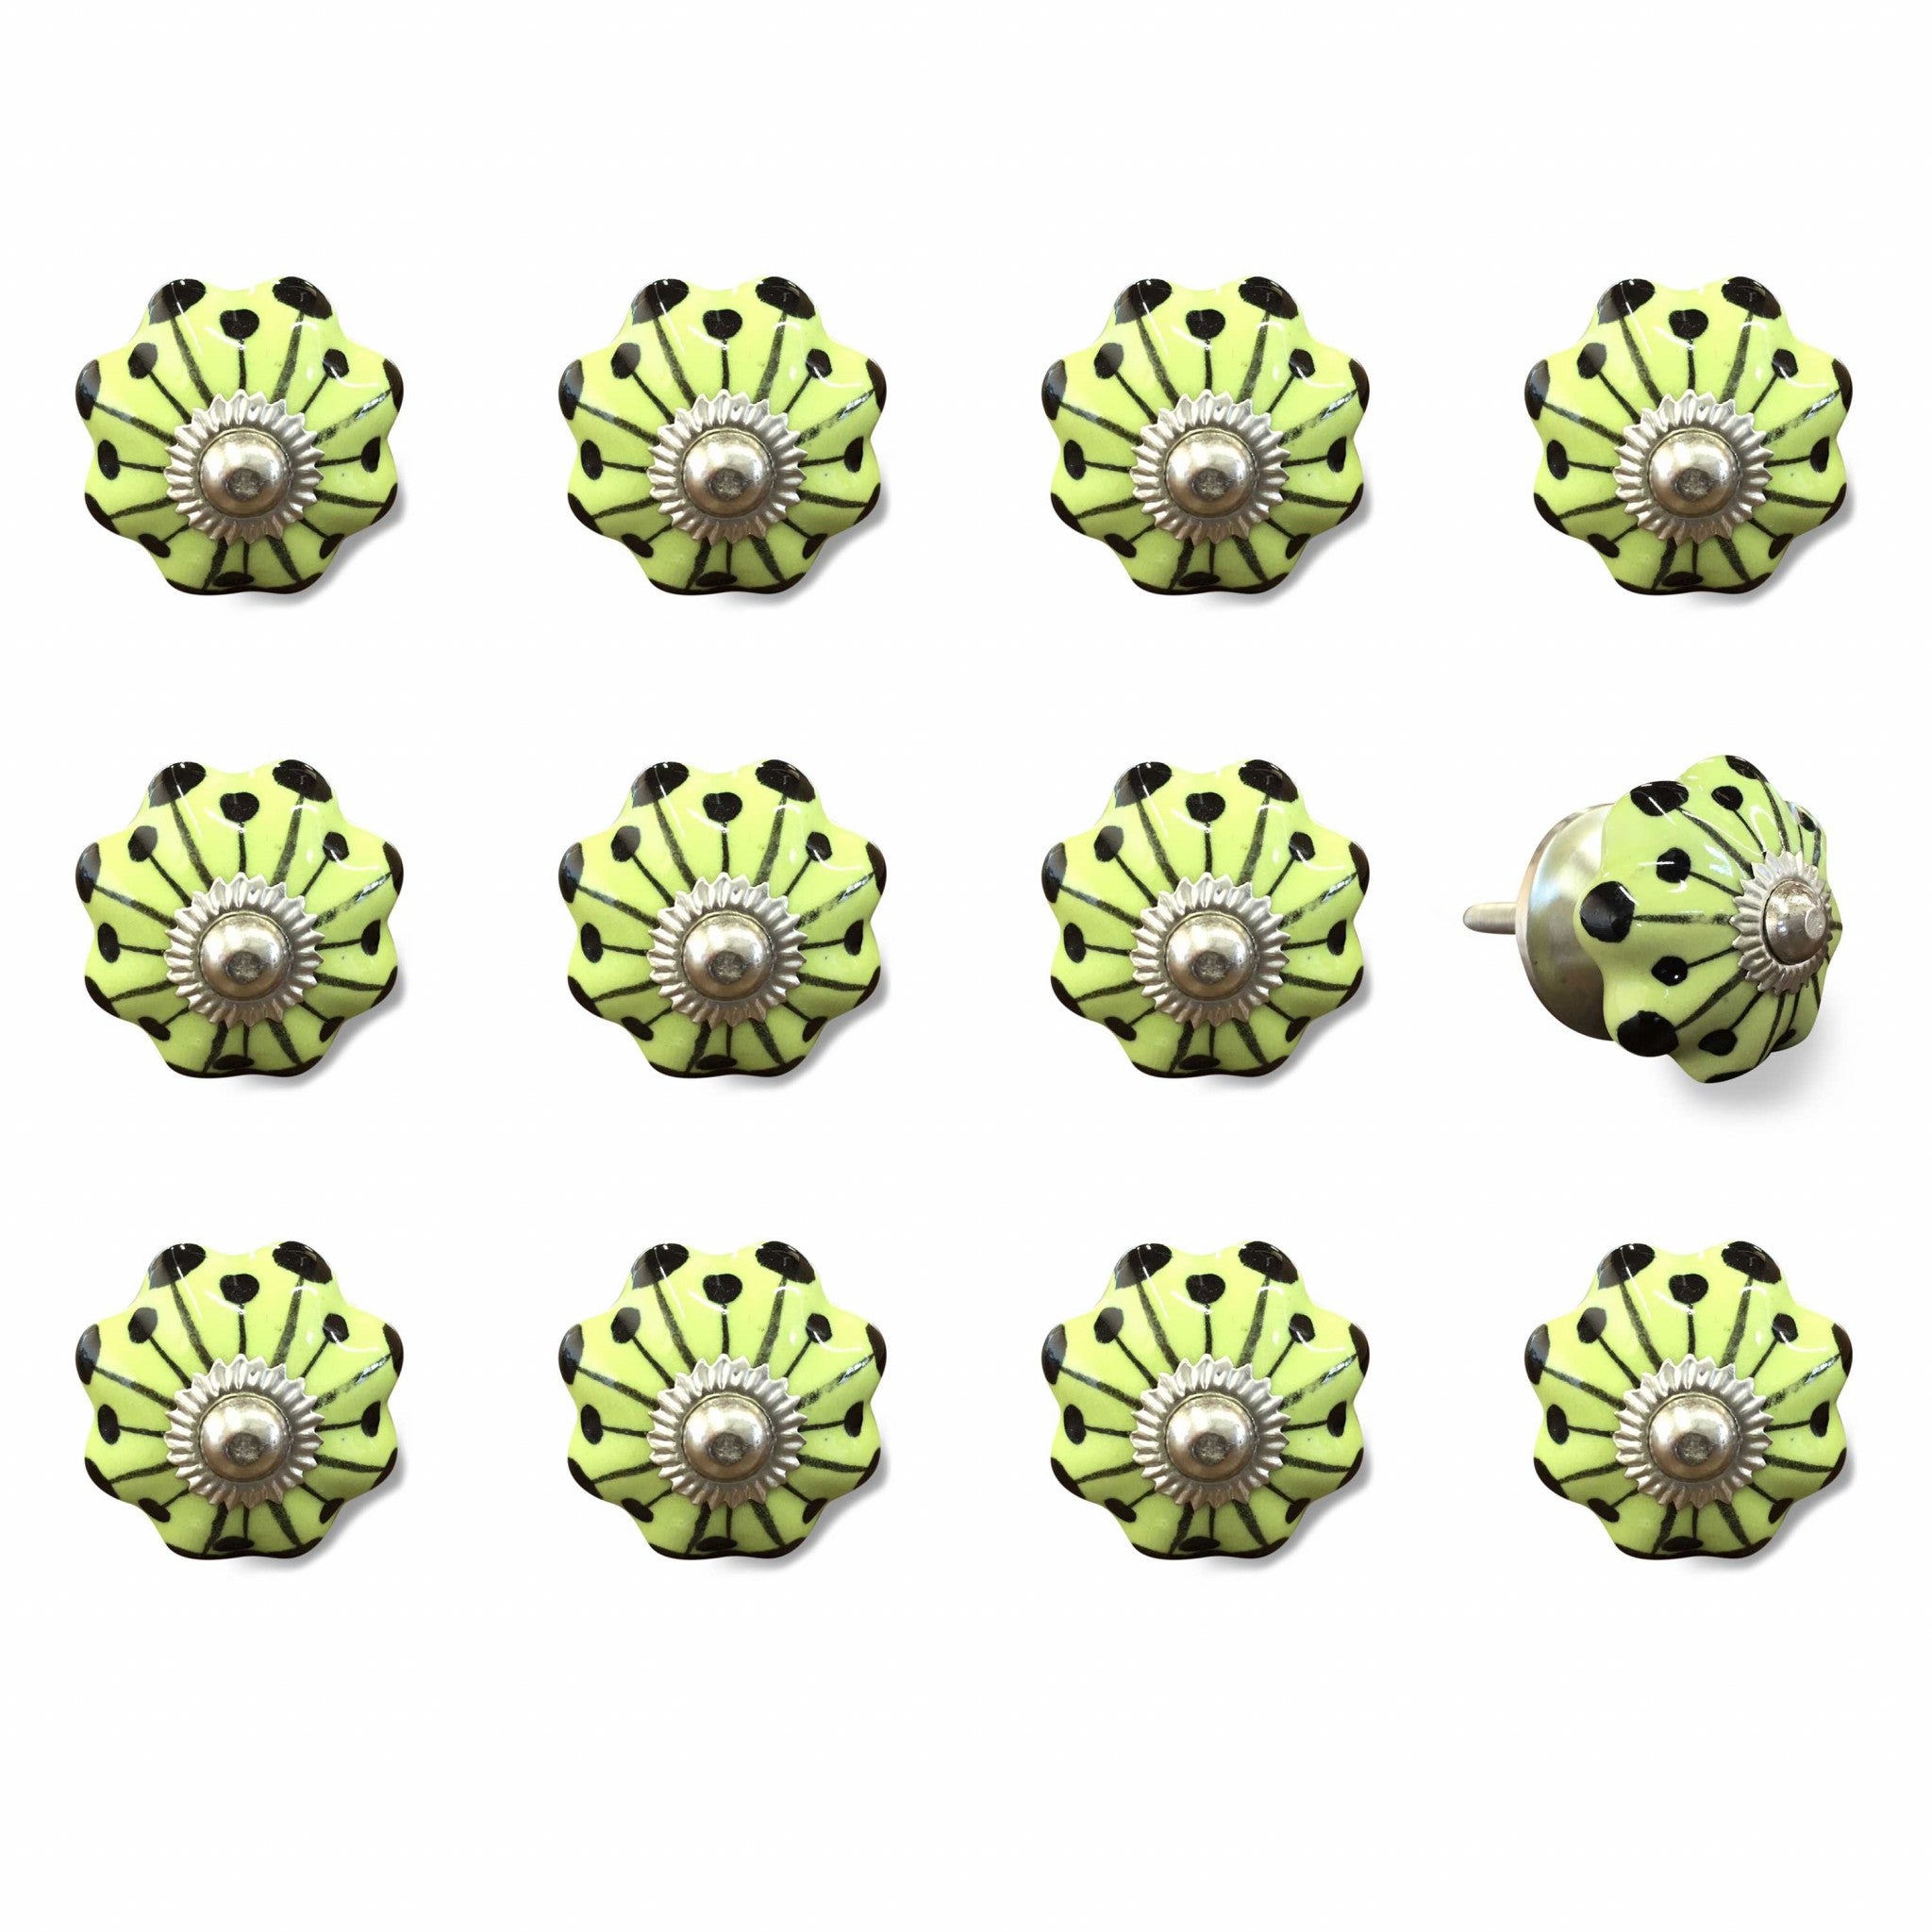 1.5" X 1.5" X 1.5" Yellow Green And Silver  Knobs 12 Pack